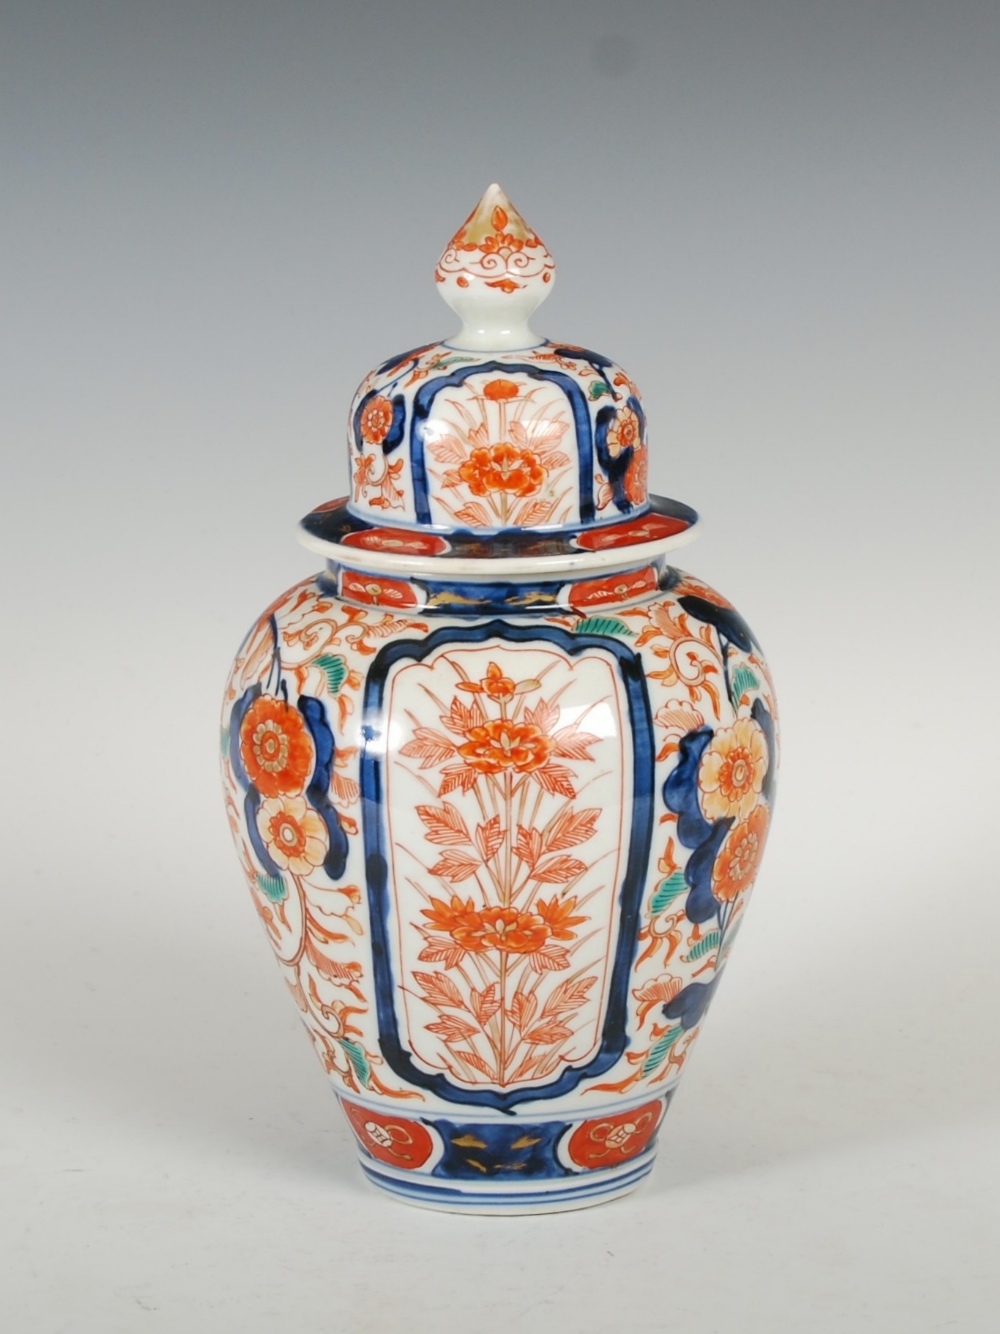 A late 19th/ early 20th century Japanese Imari jar and cover, decorated with two rectangular